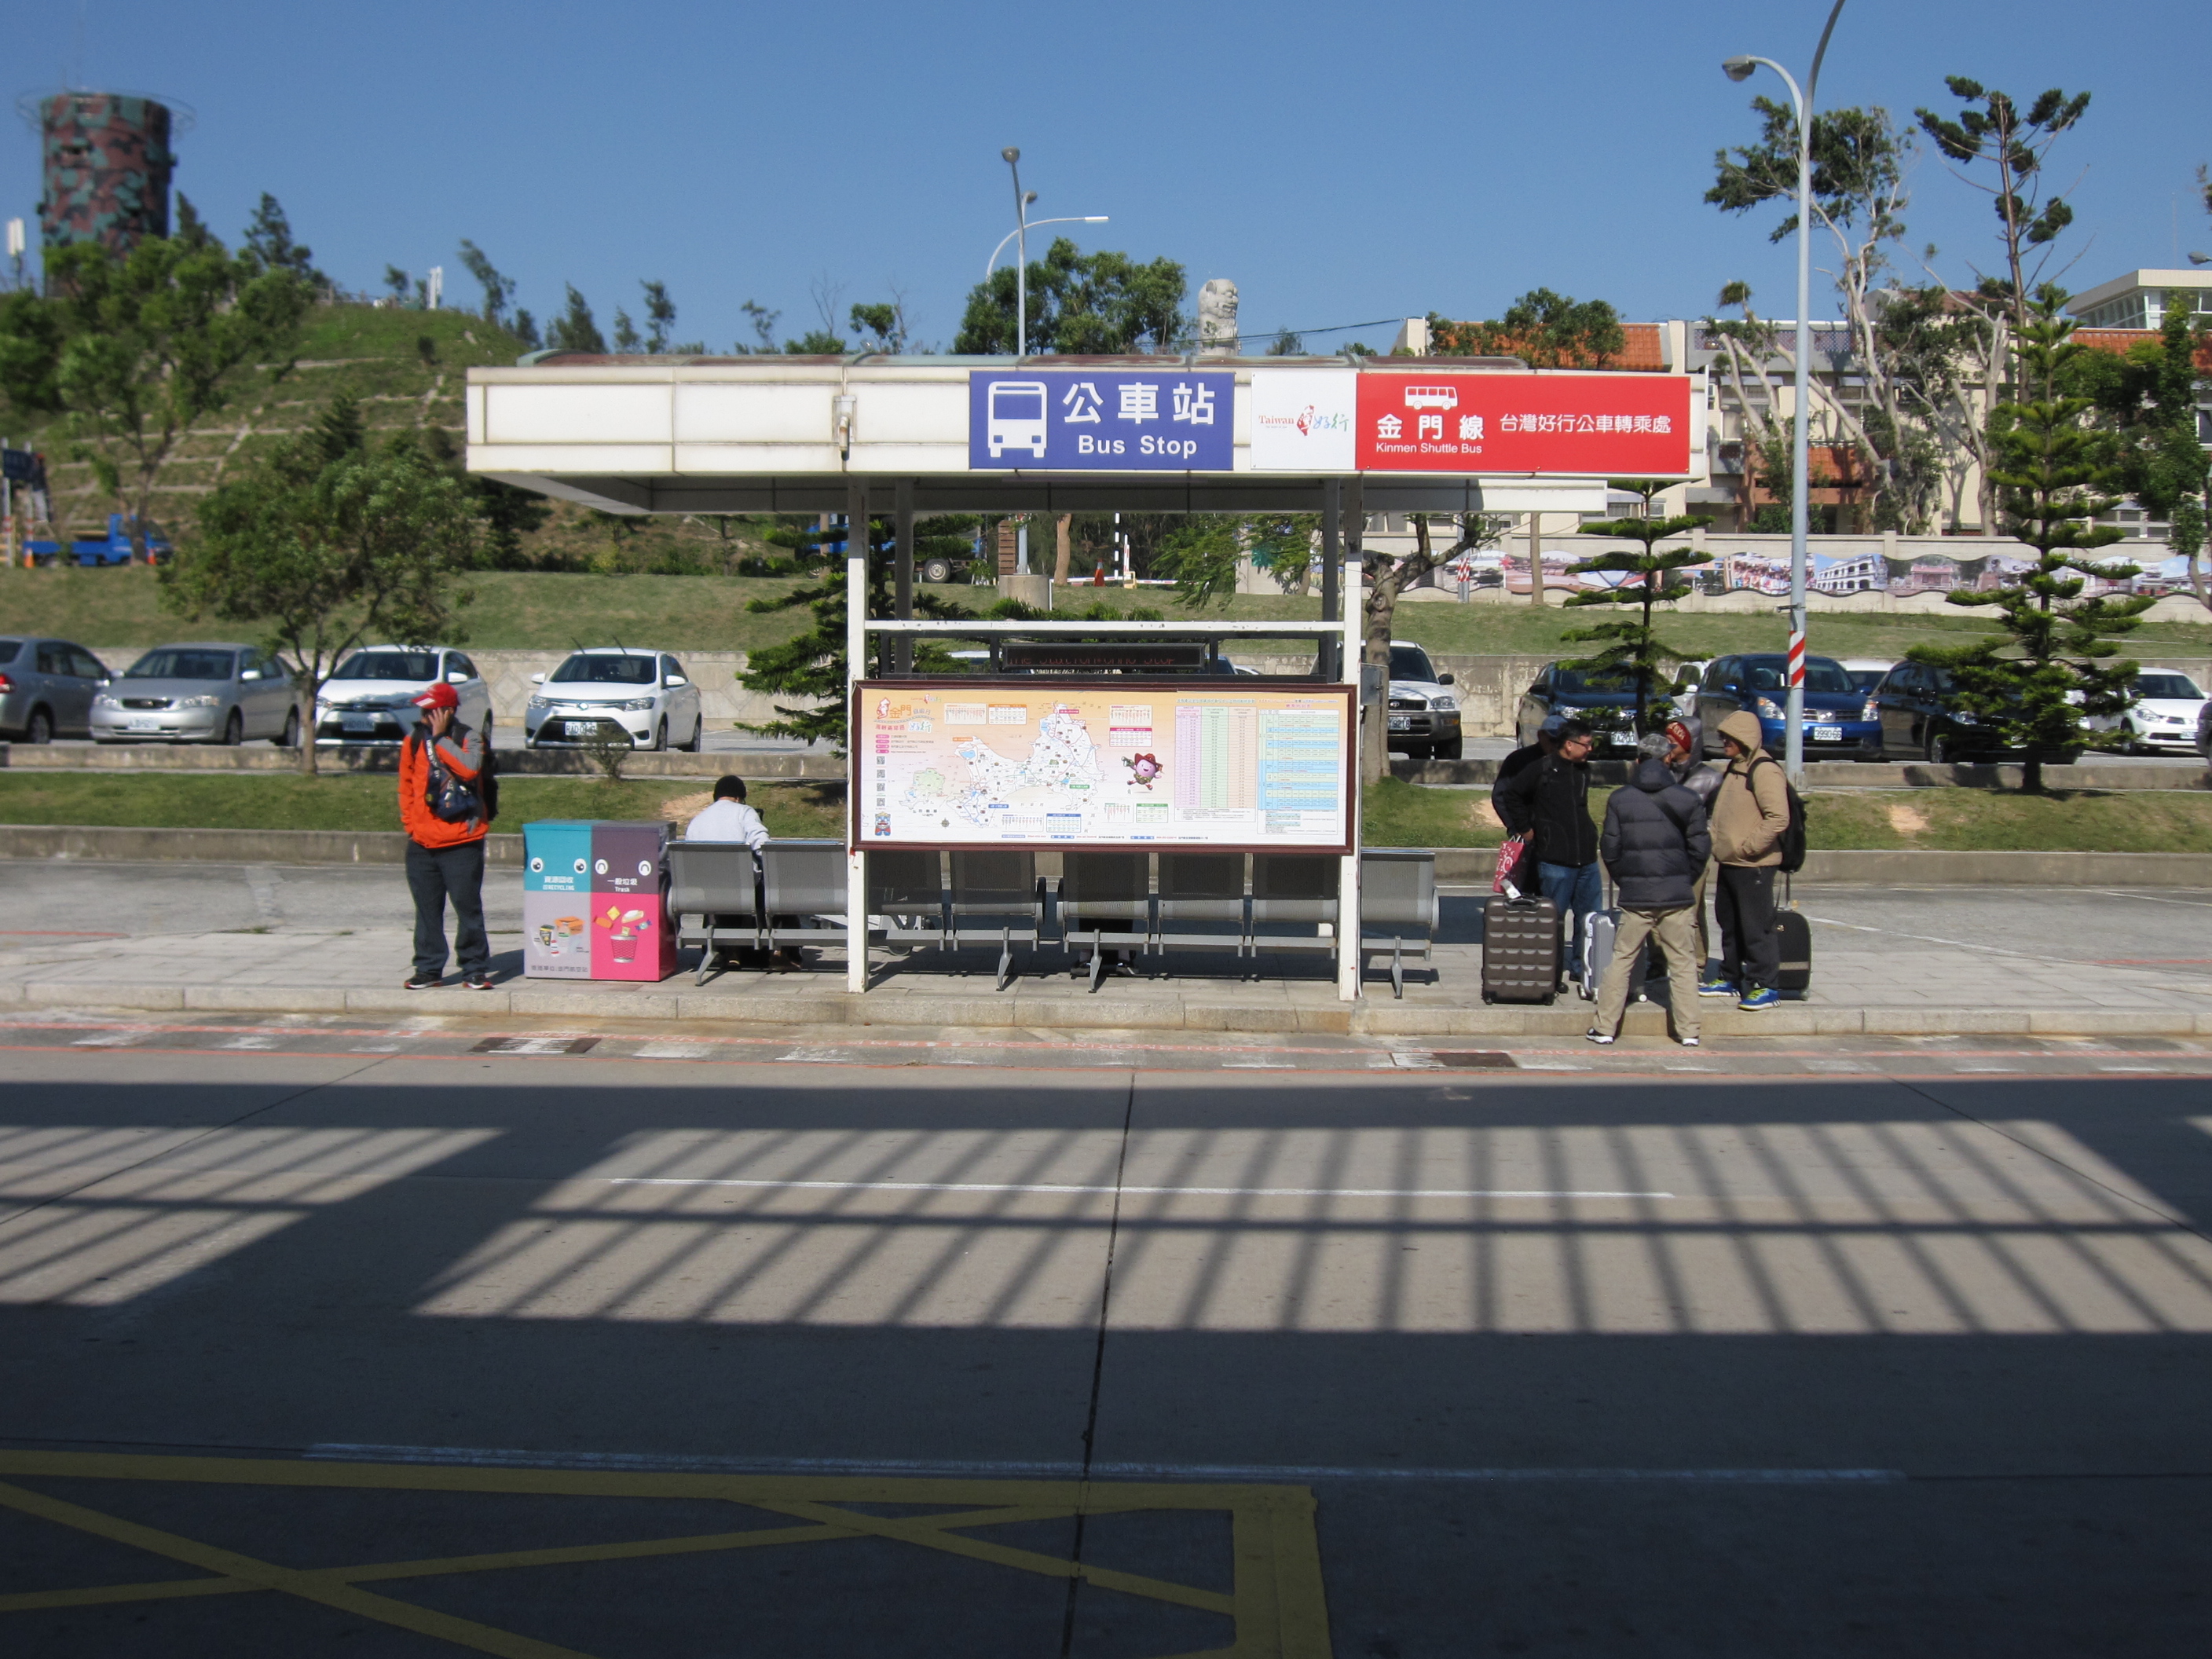 Bus Station in front of the Departure Gate of the Airport